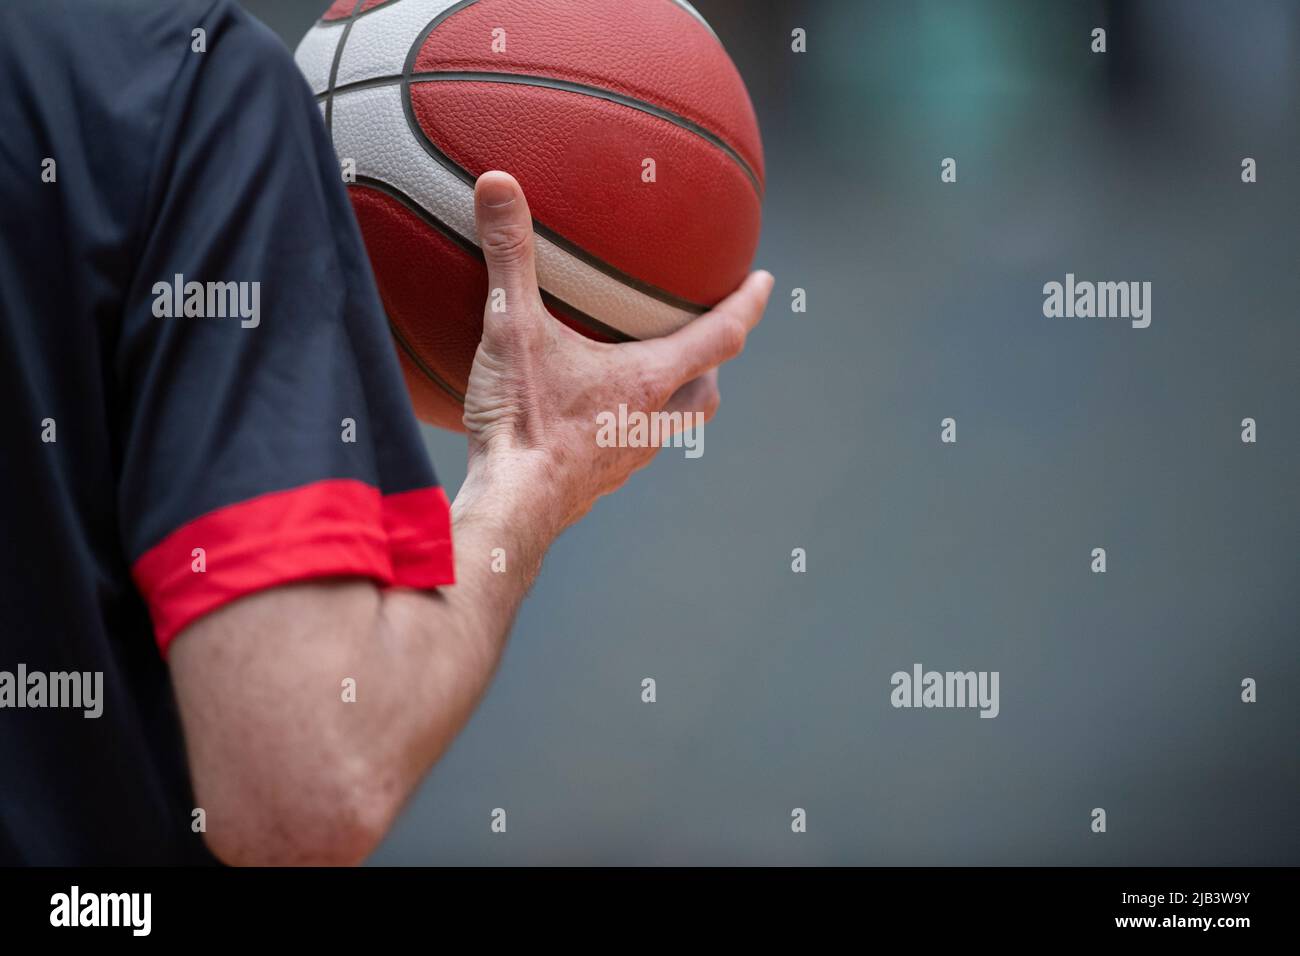 Basketball referee holding a basketball ball. Horizontal sport theme poster, greeting cards, headers, website and app Stock Photo